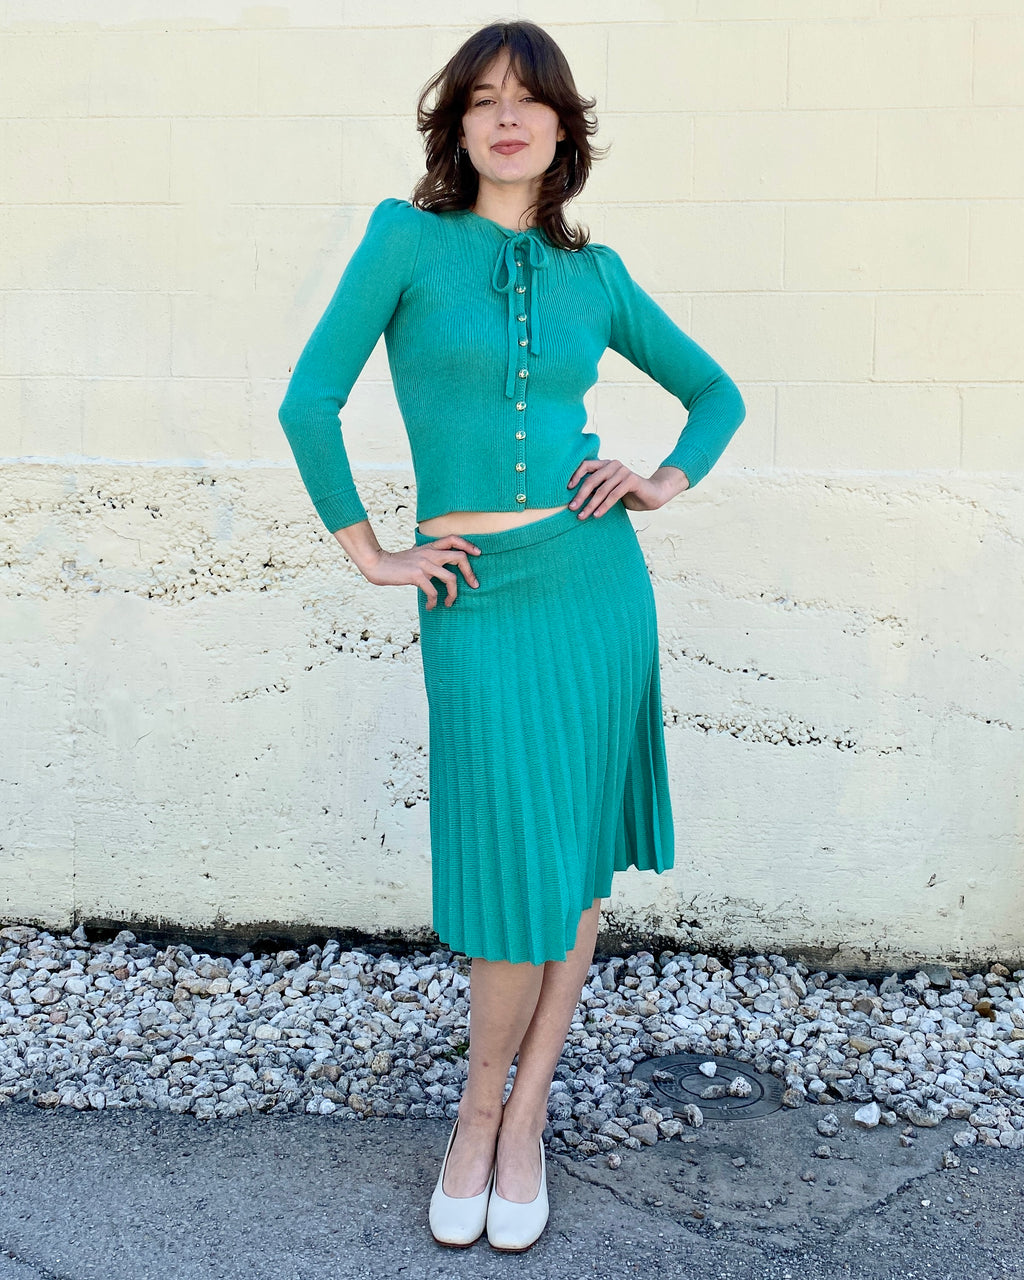 St Johns It's The Teal Deal Two Piece Set